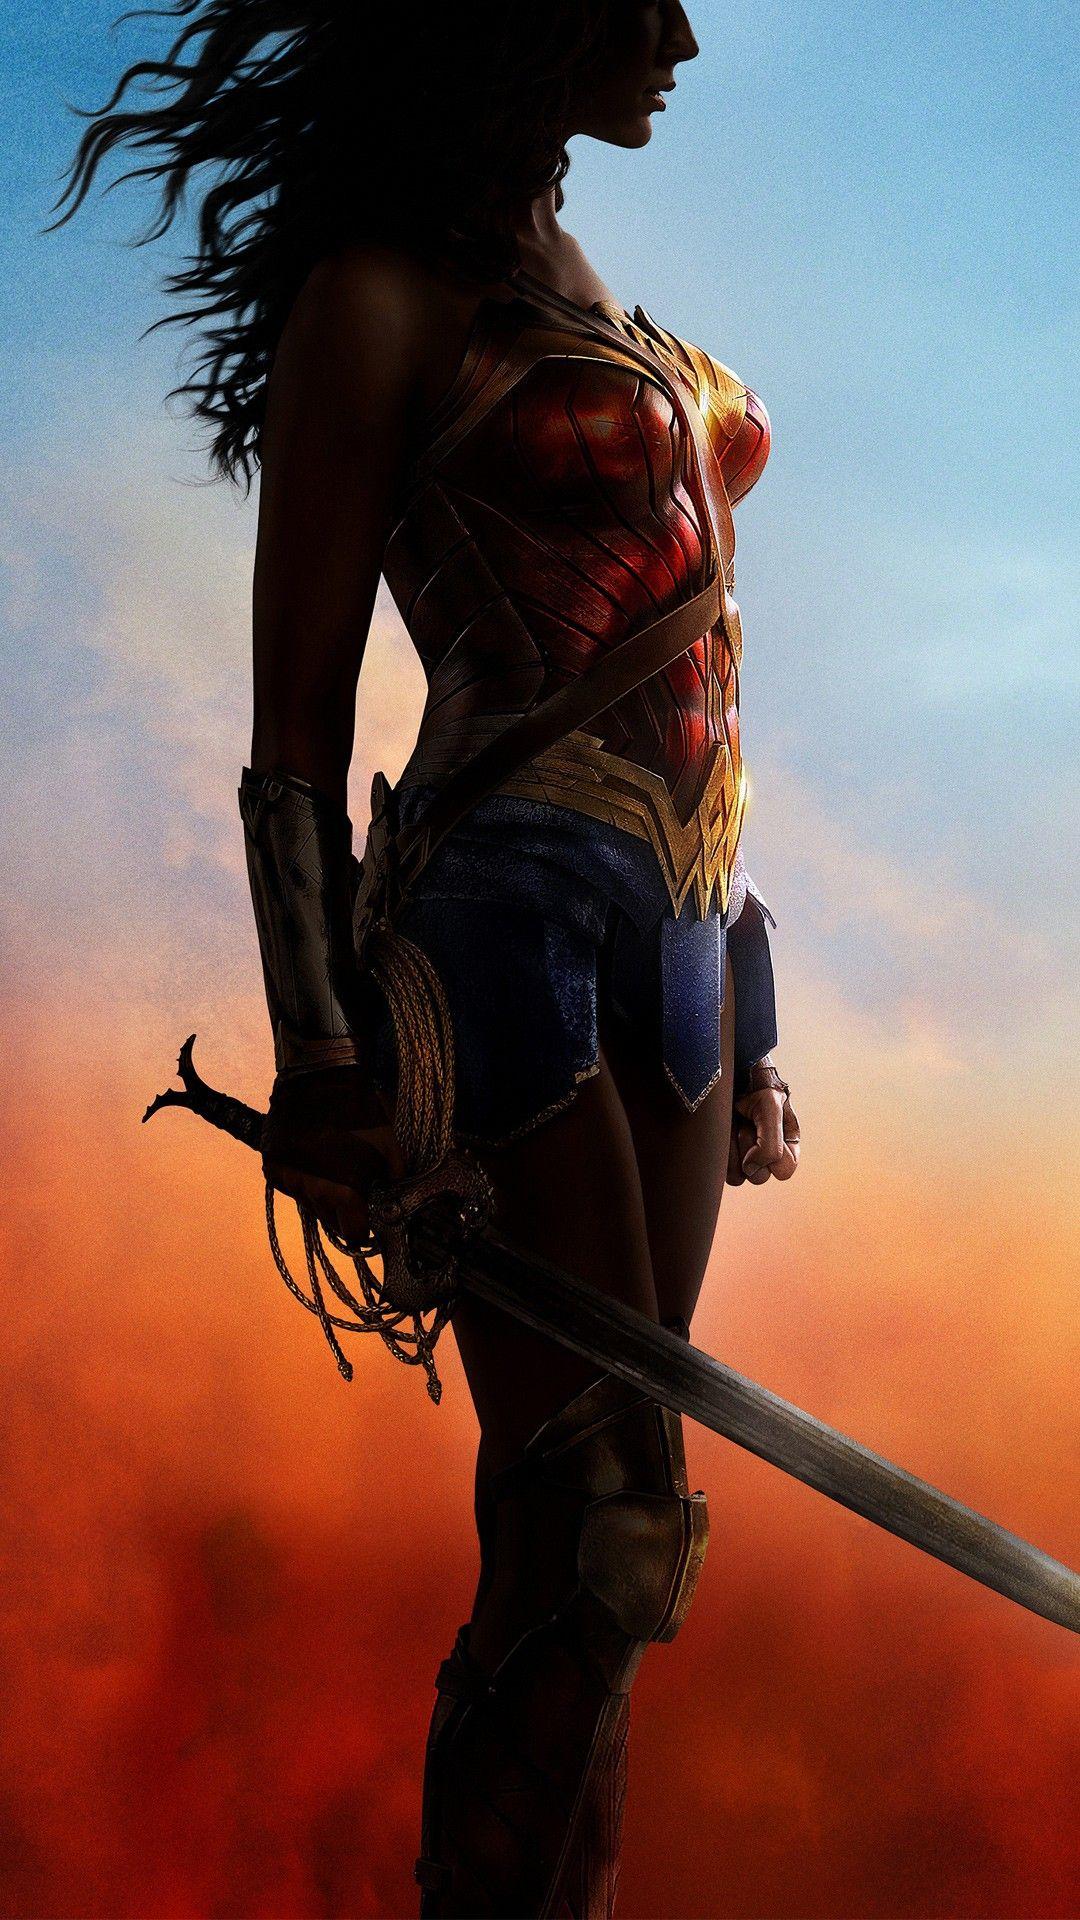 Wonder Woman download the new for android